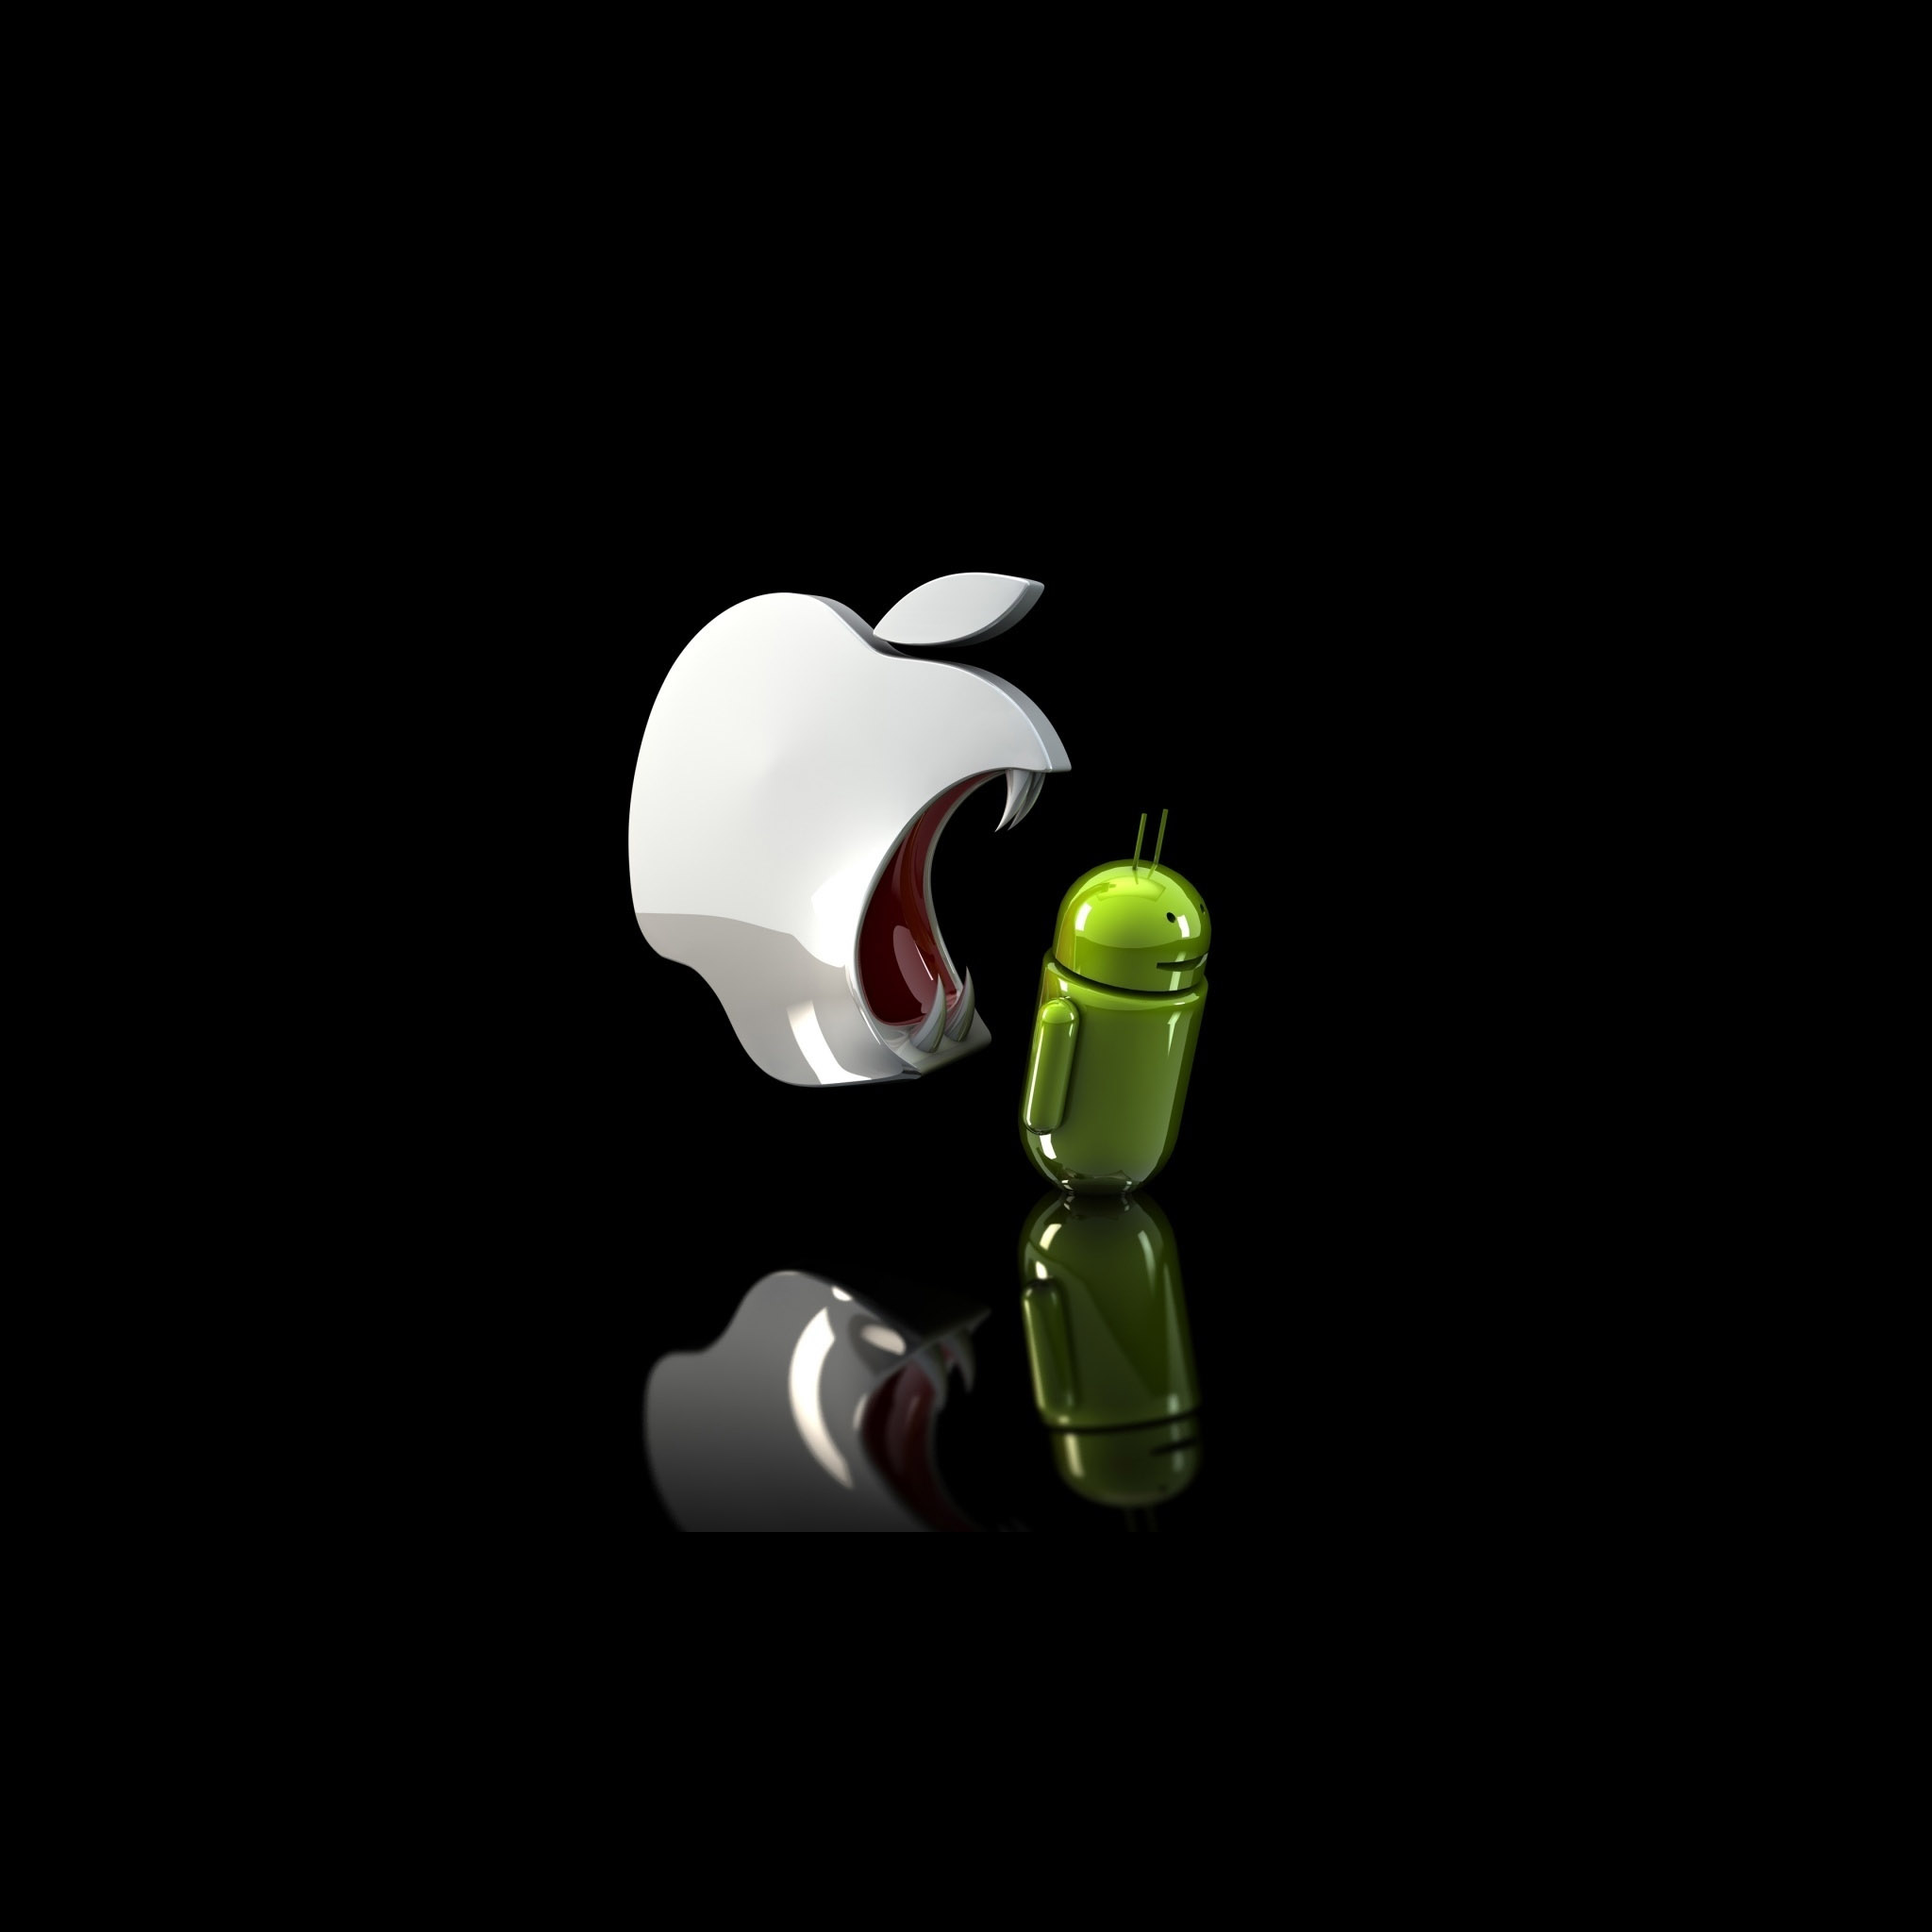 Apple Ready To Eat Android iPad Air Wallpaper Download iPhone